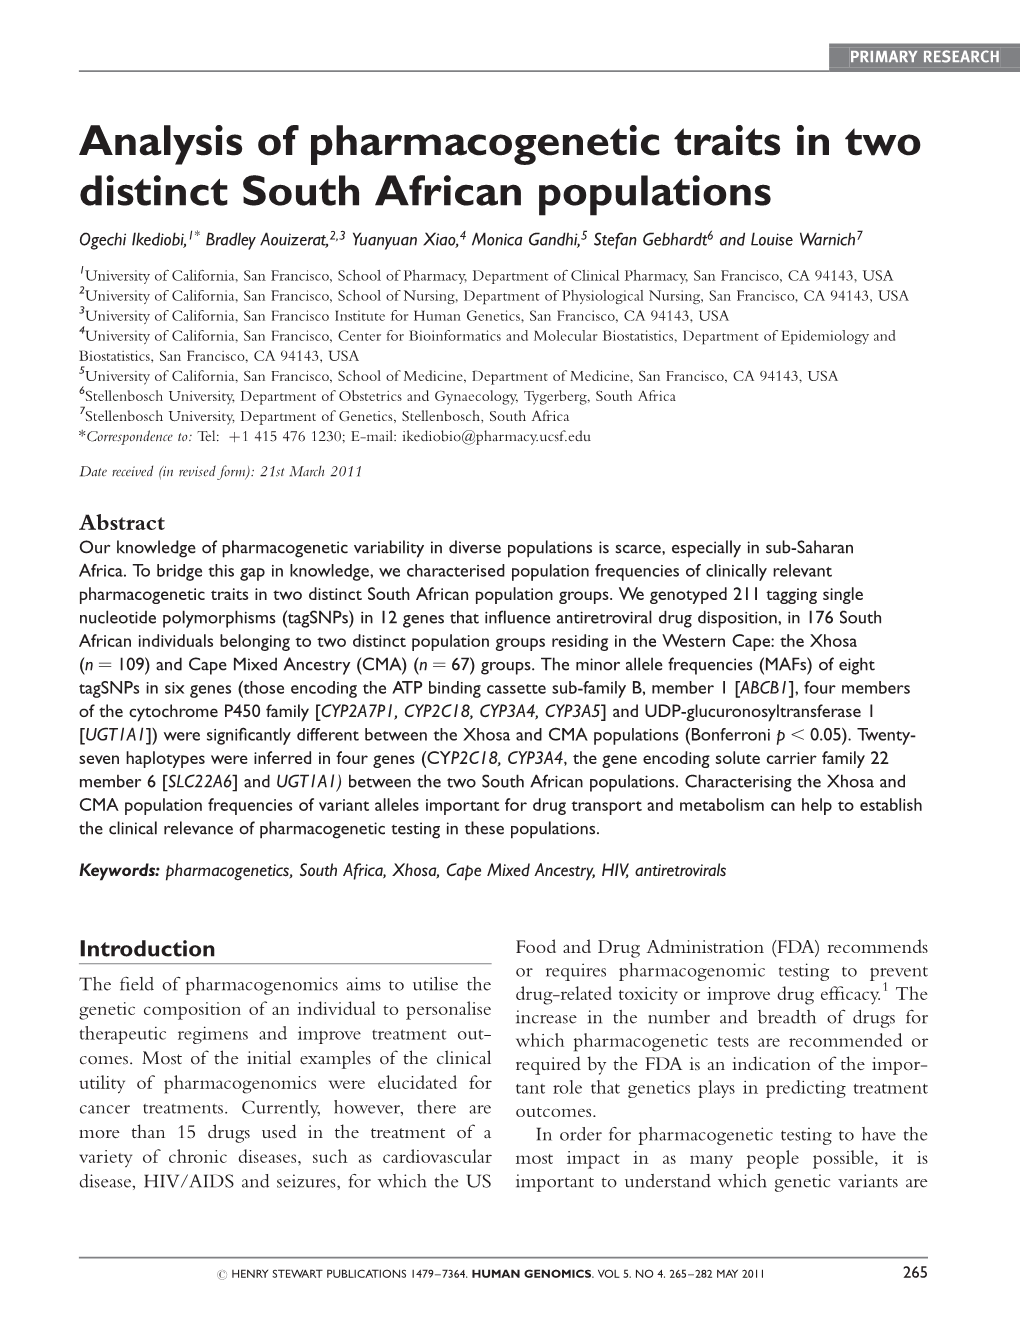 Analysis of Pharmacogenetic Traits in Two Distinct South African Populations